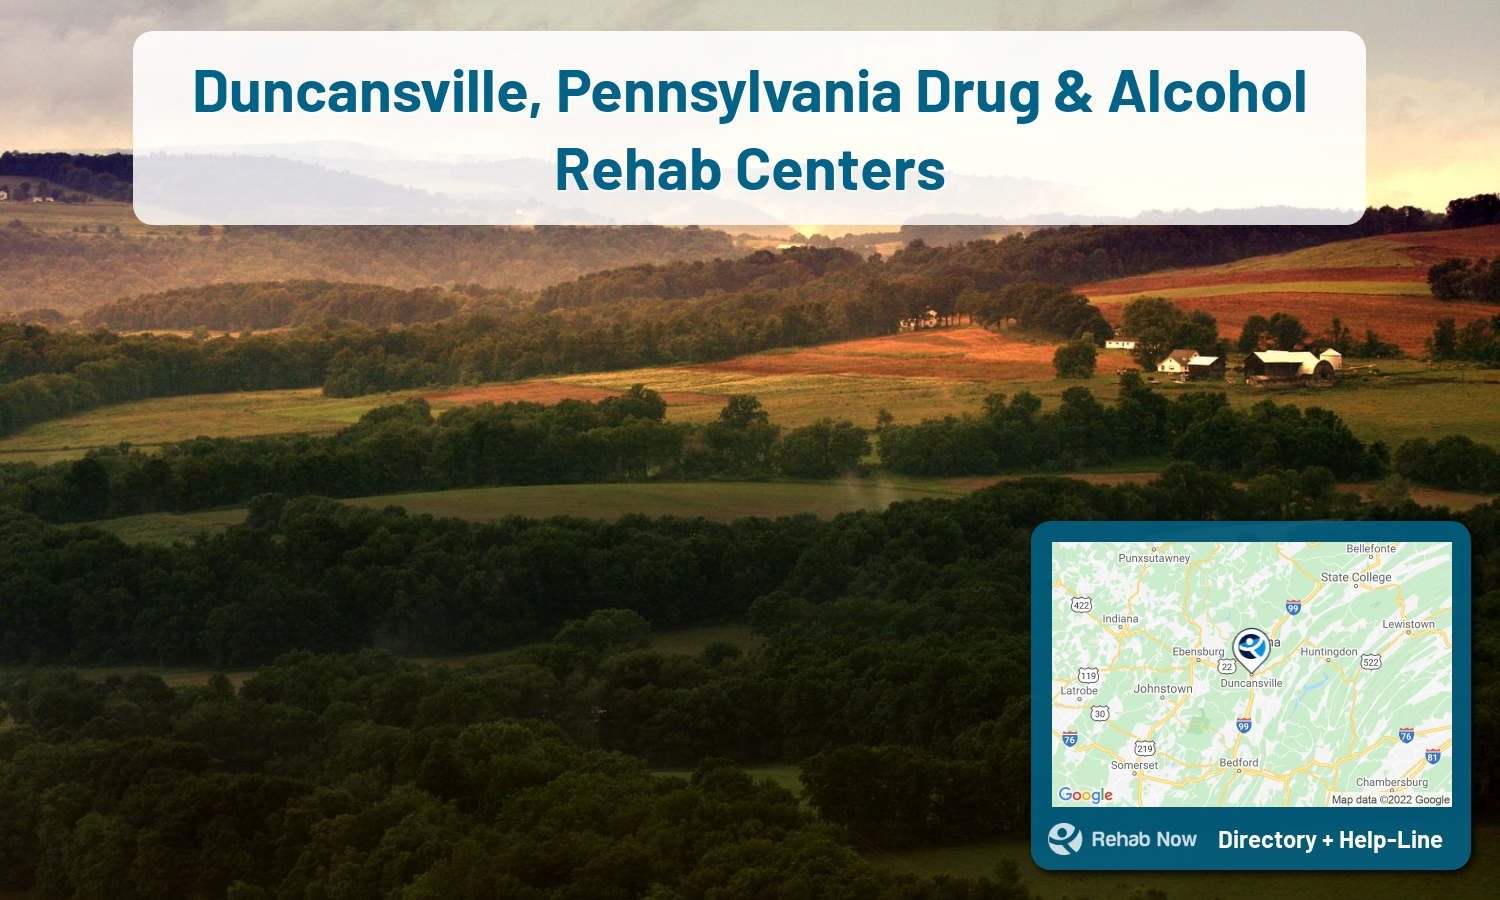 List of alcohol and drug treatment centers near you in Duncansville, Pennsylvania. Research certifications, programs, methods, pricing, and more.